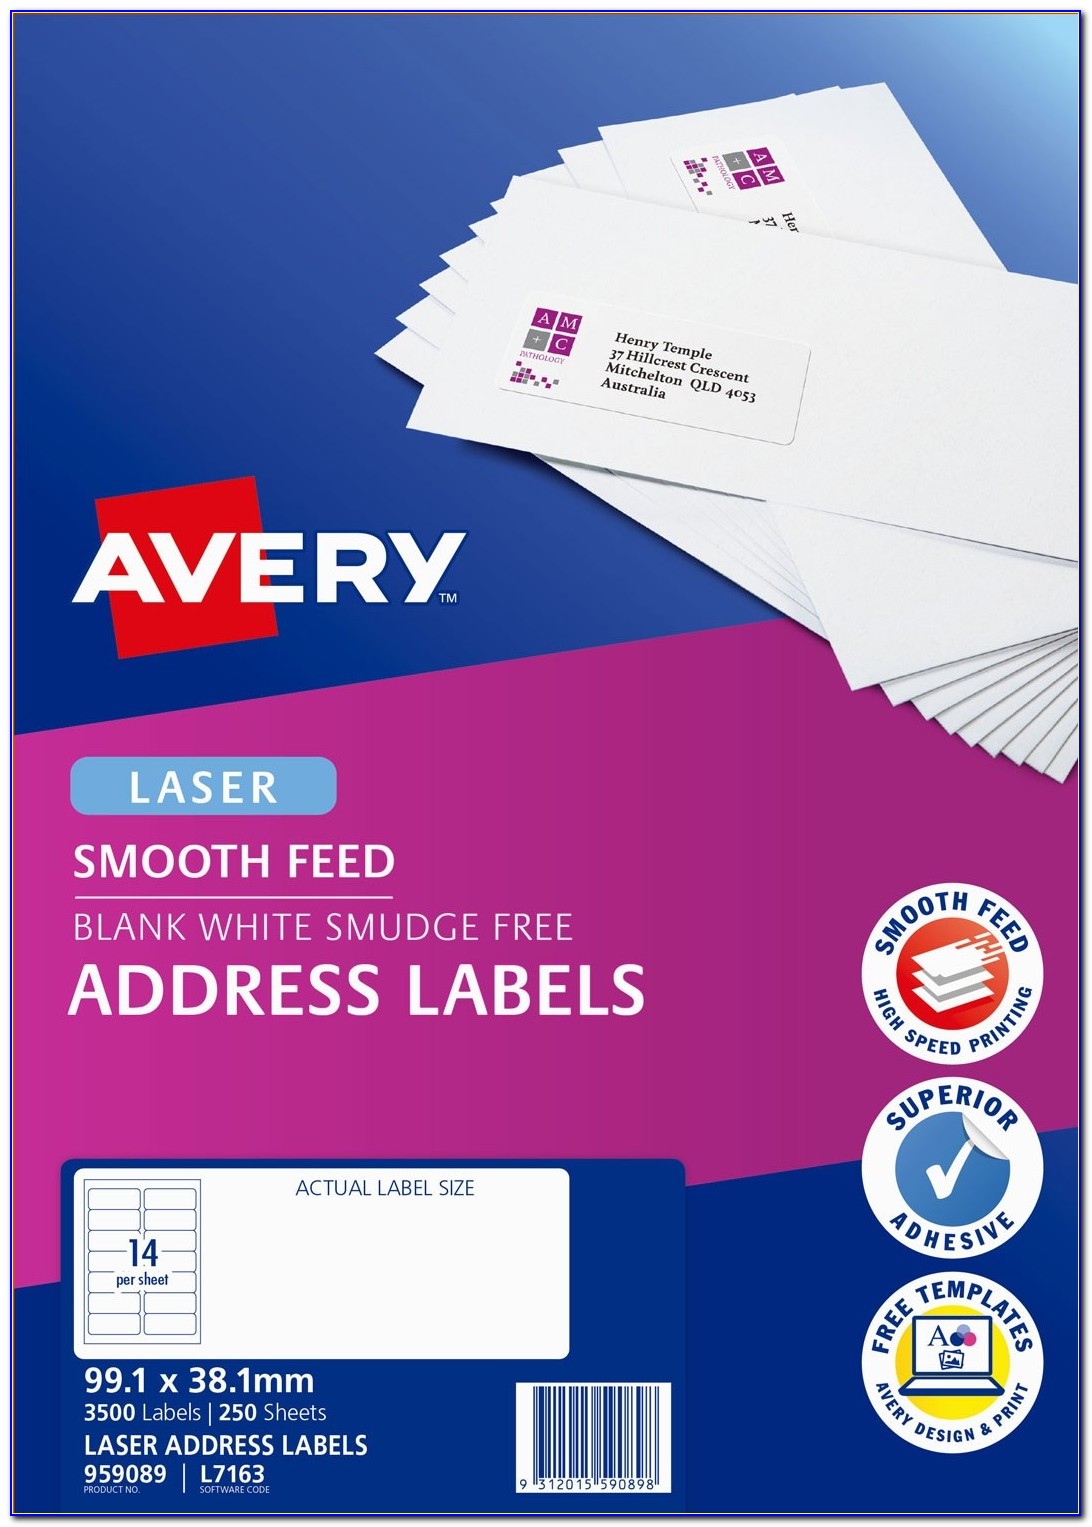 Avery Label Template Download 5161